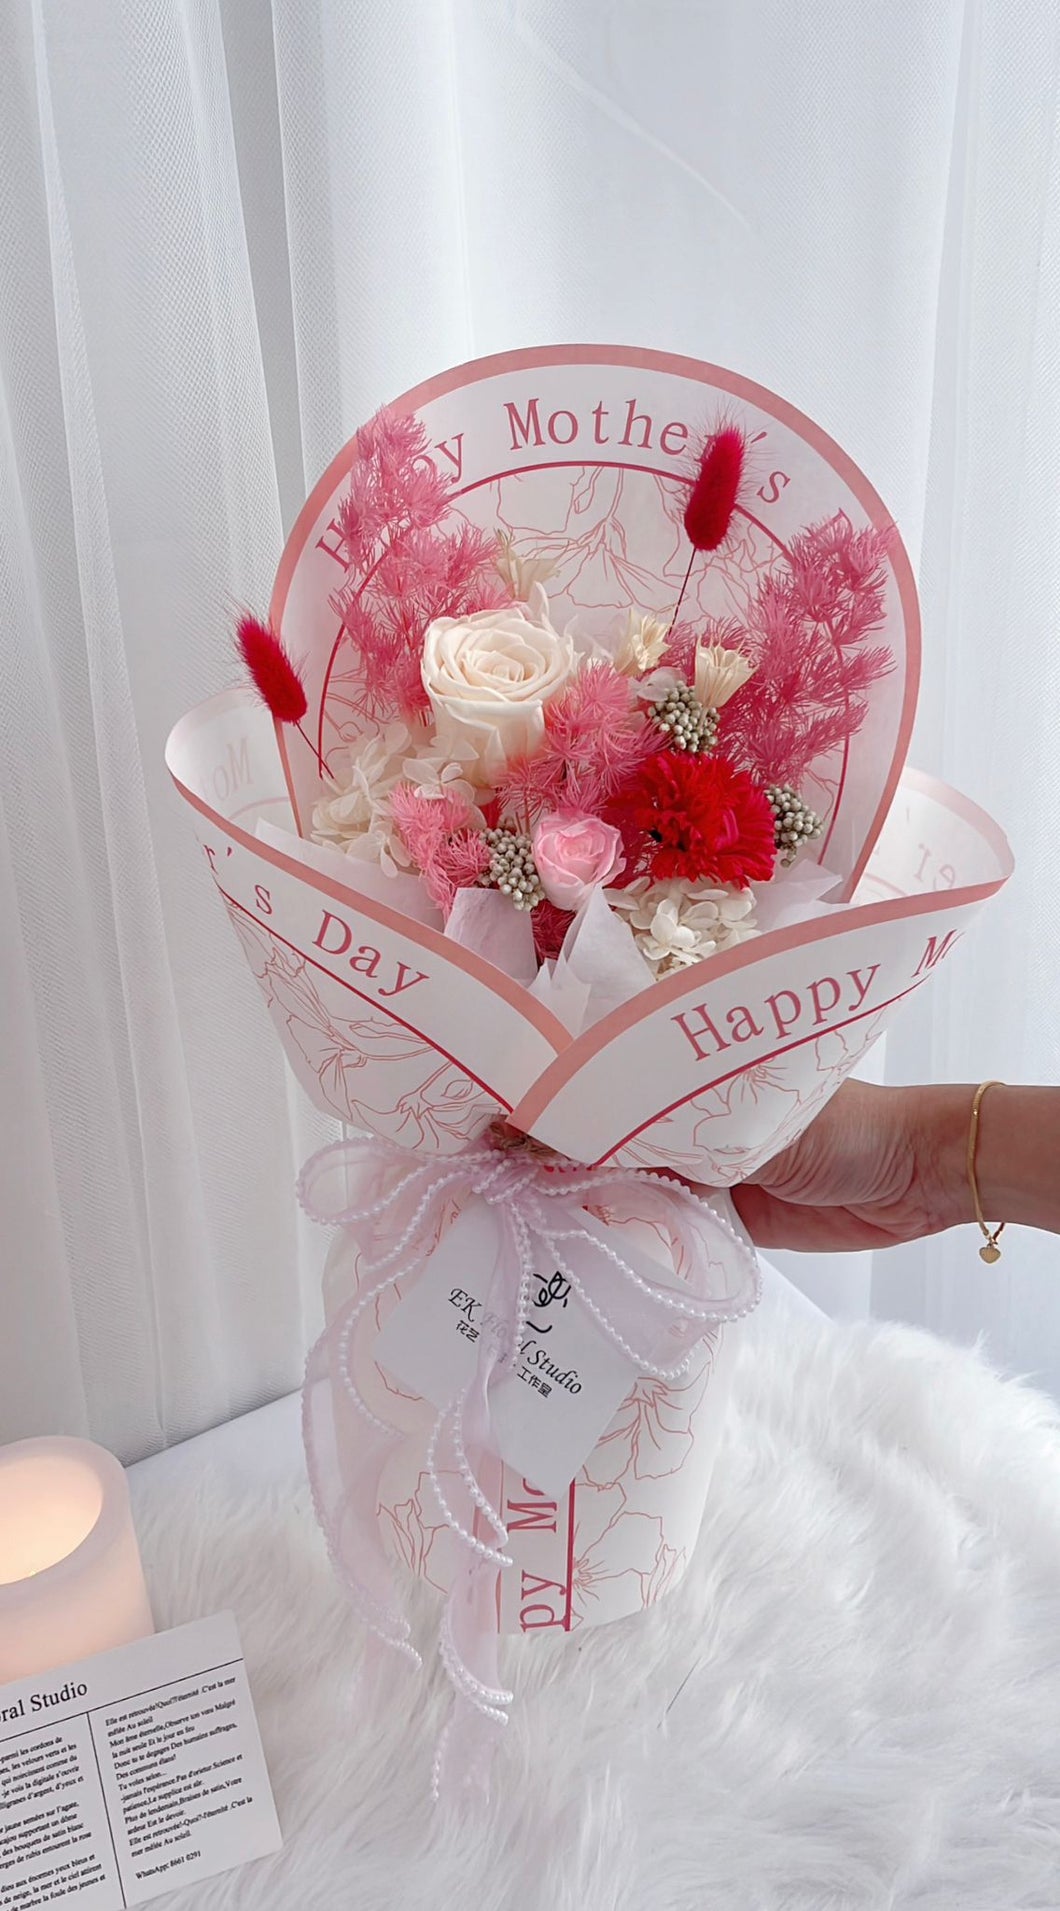 Mothers' Day Carnation Everlasting Bouquet with White X Pink Tone 母亲节白粉色系永生花康乃馨花束